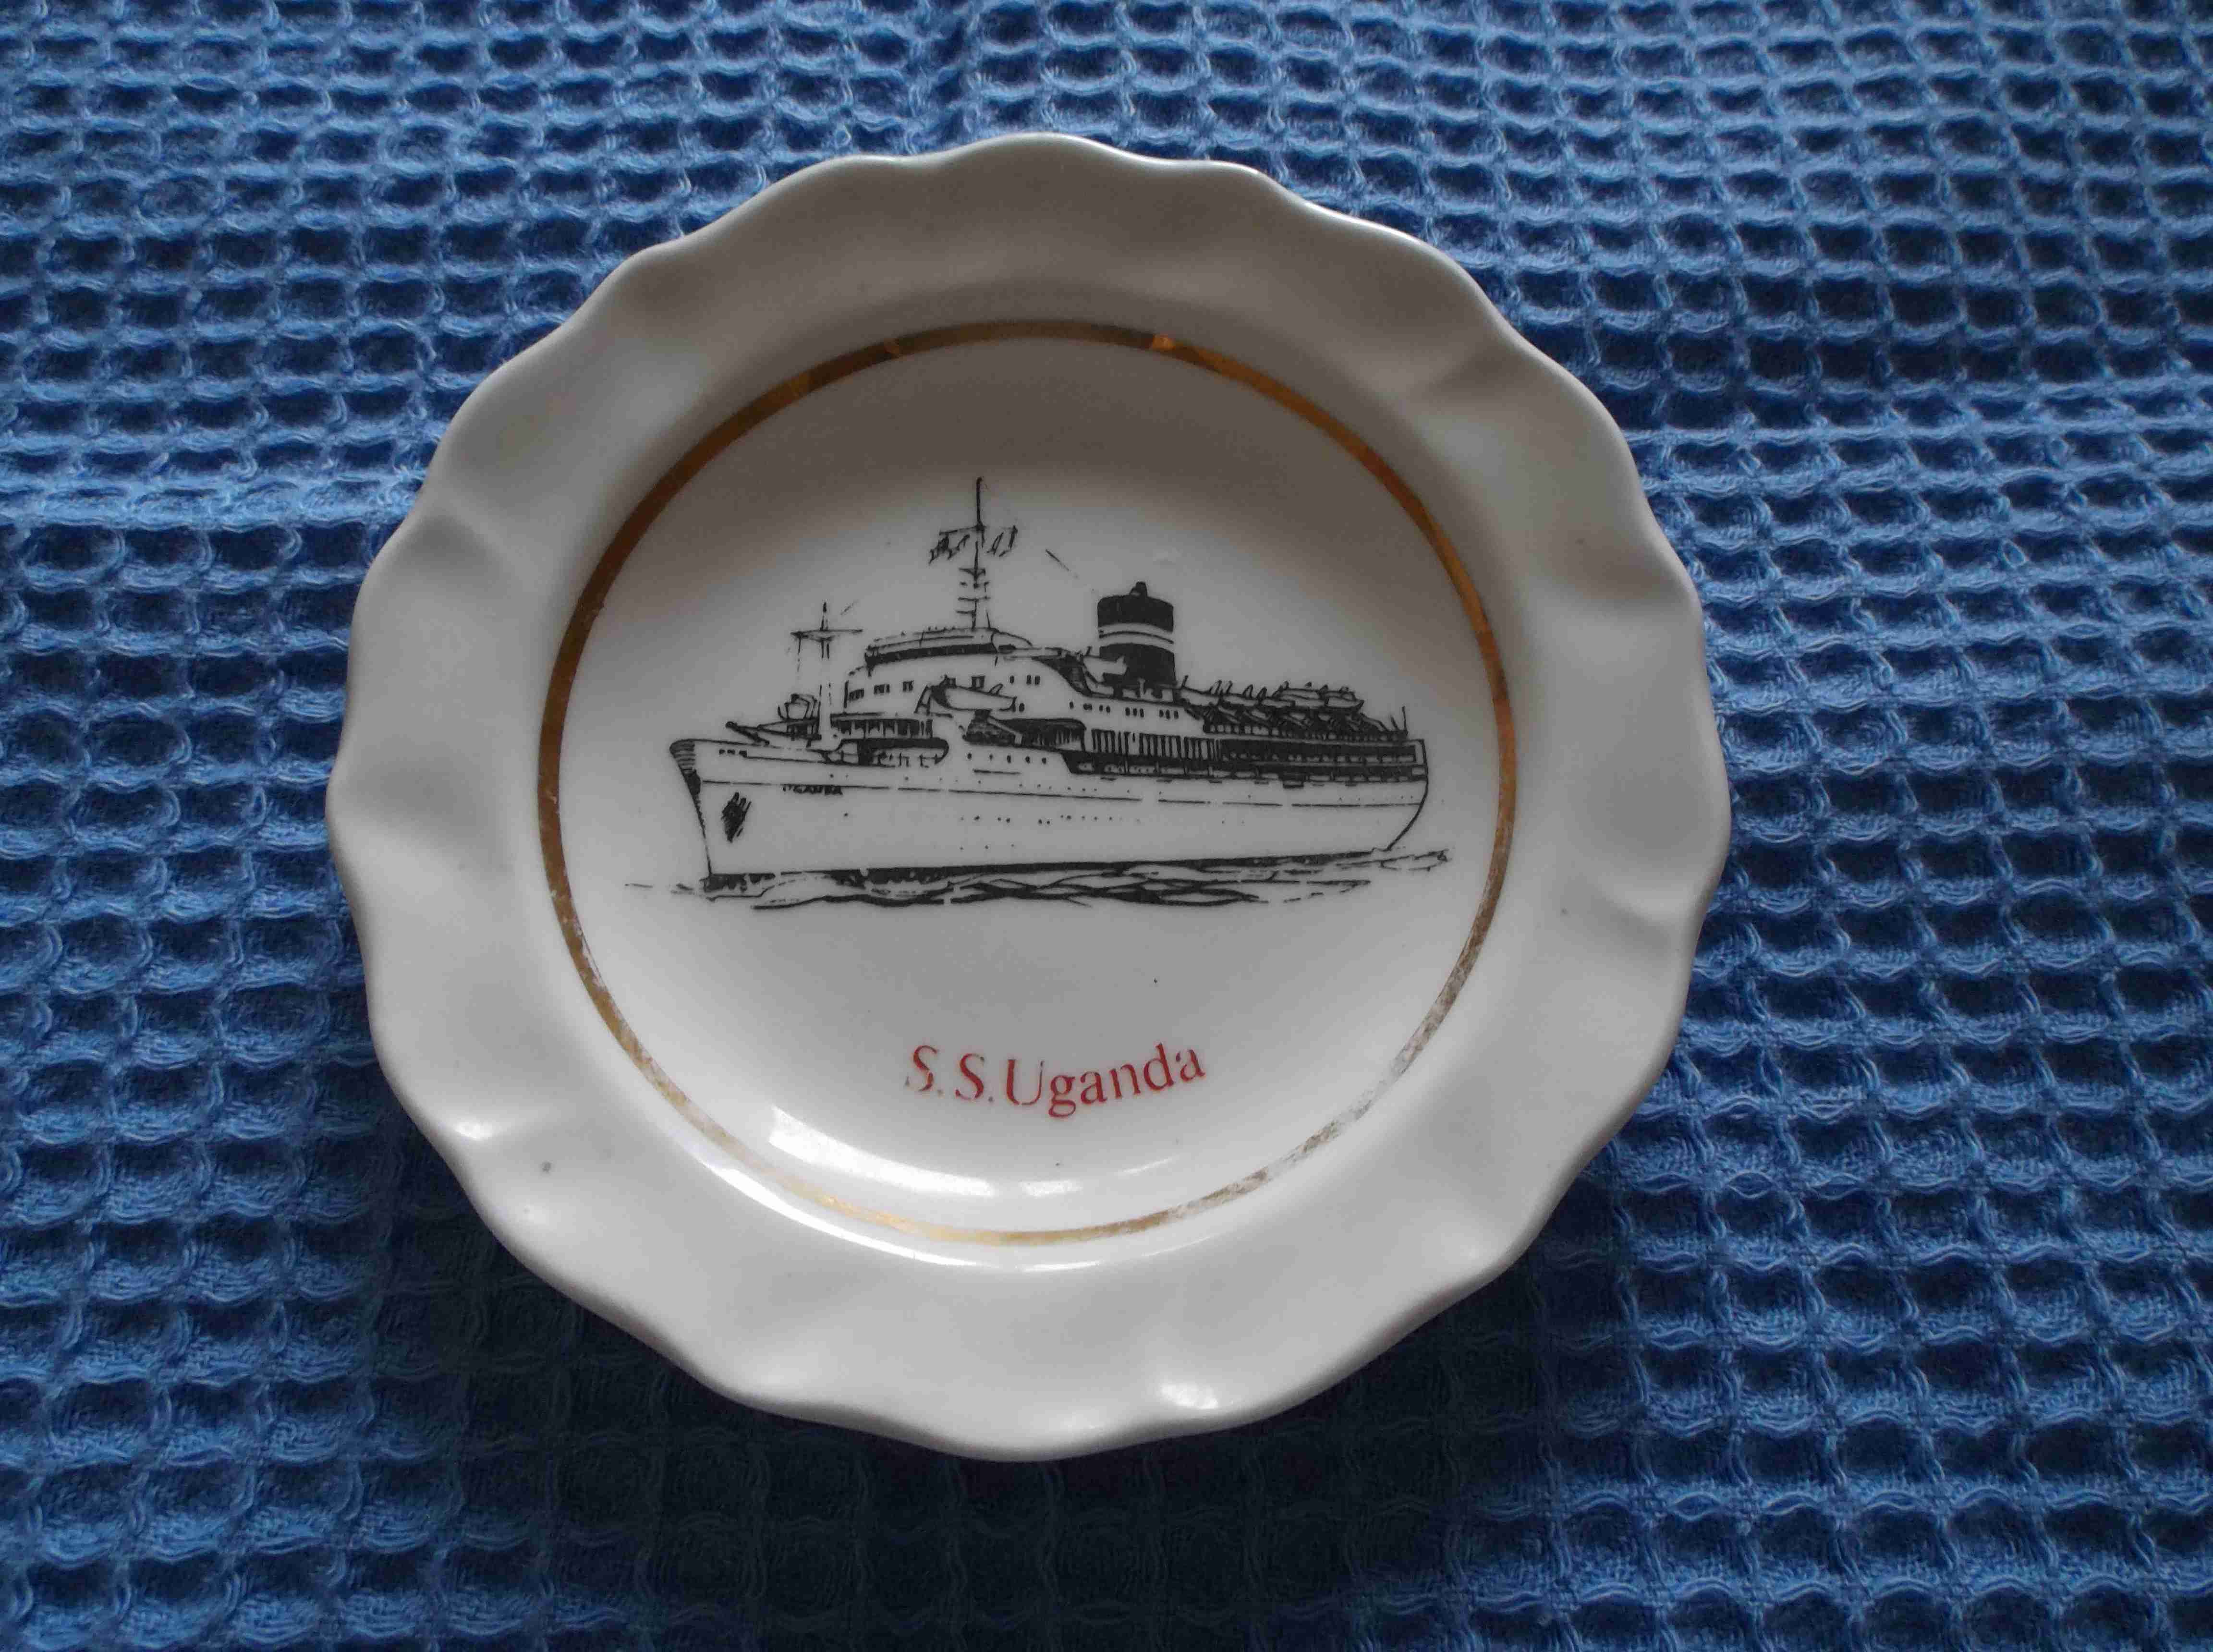 SUPERB DECORATIVE CHINA DISH SOUVENIR FROM THE SS UGANDA OF THE B.I.S.N.Co.